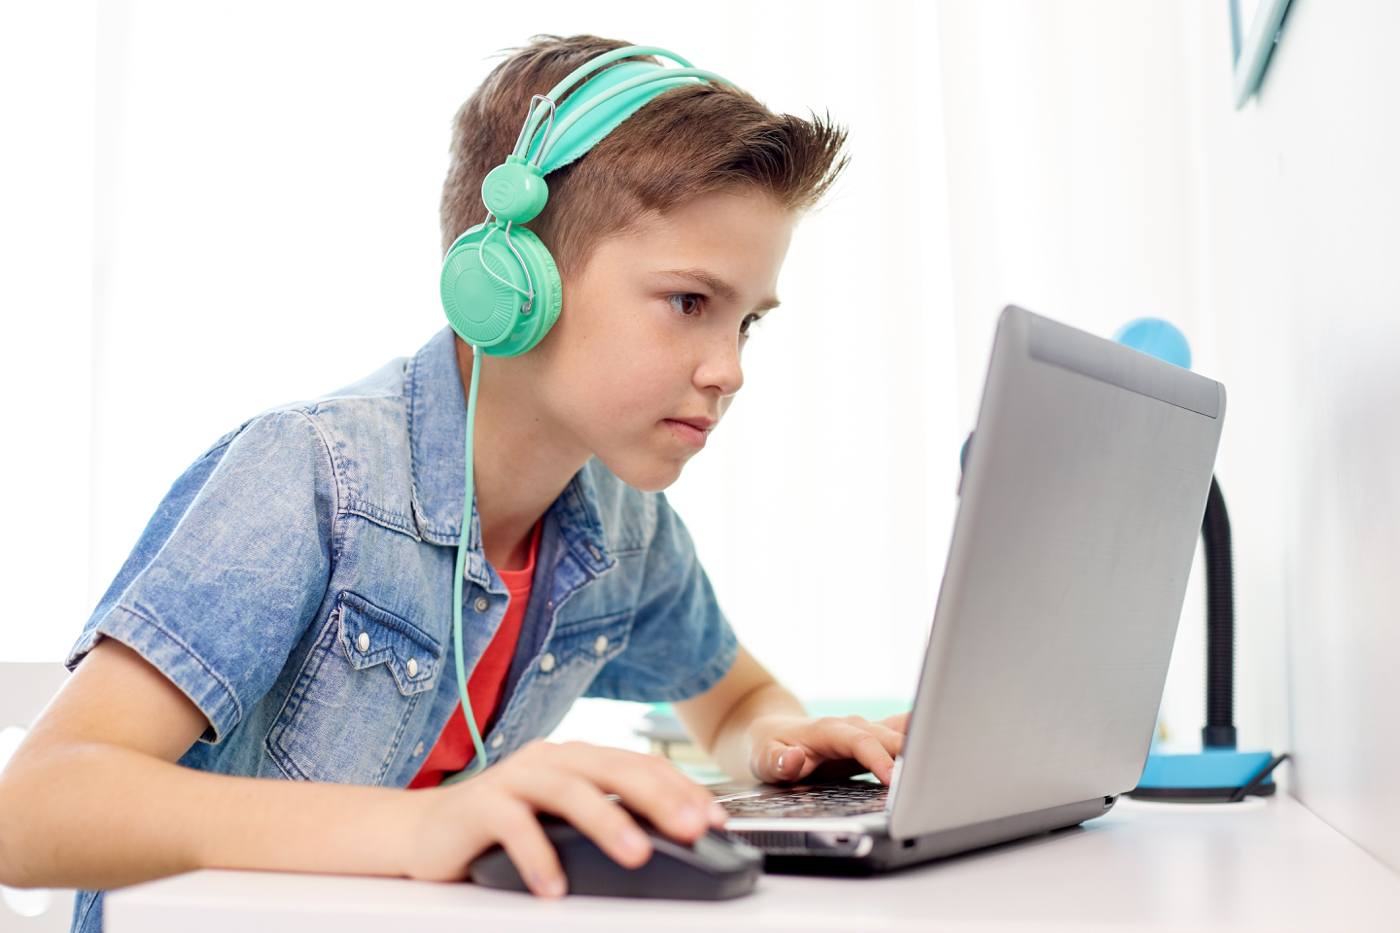 Computer games and online games offer a great danger to children